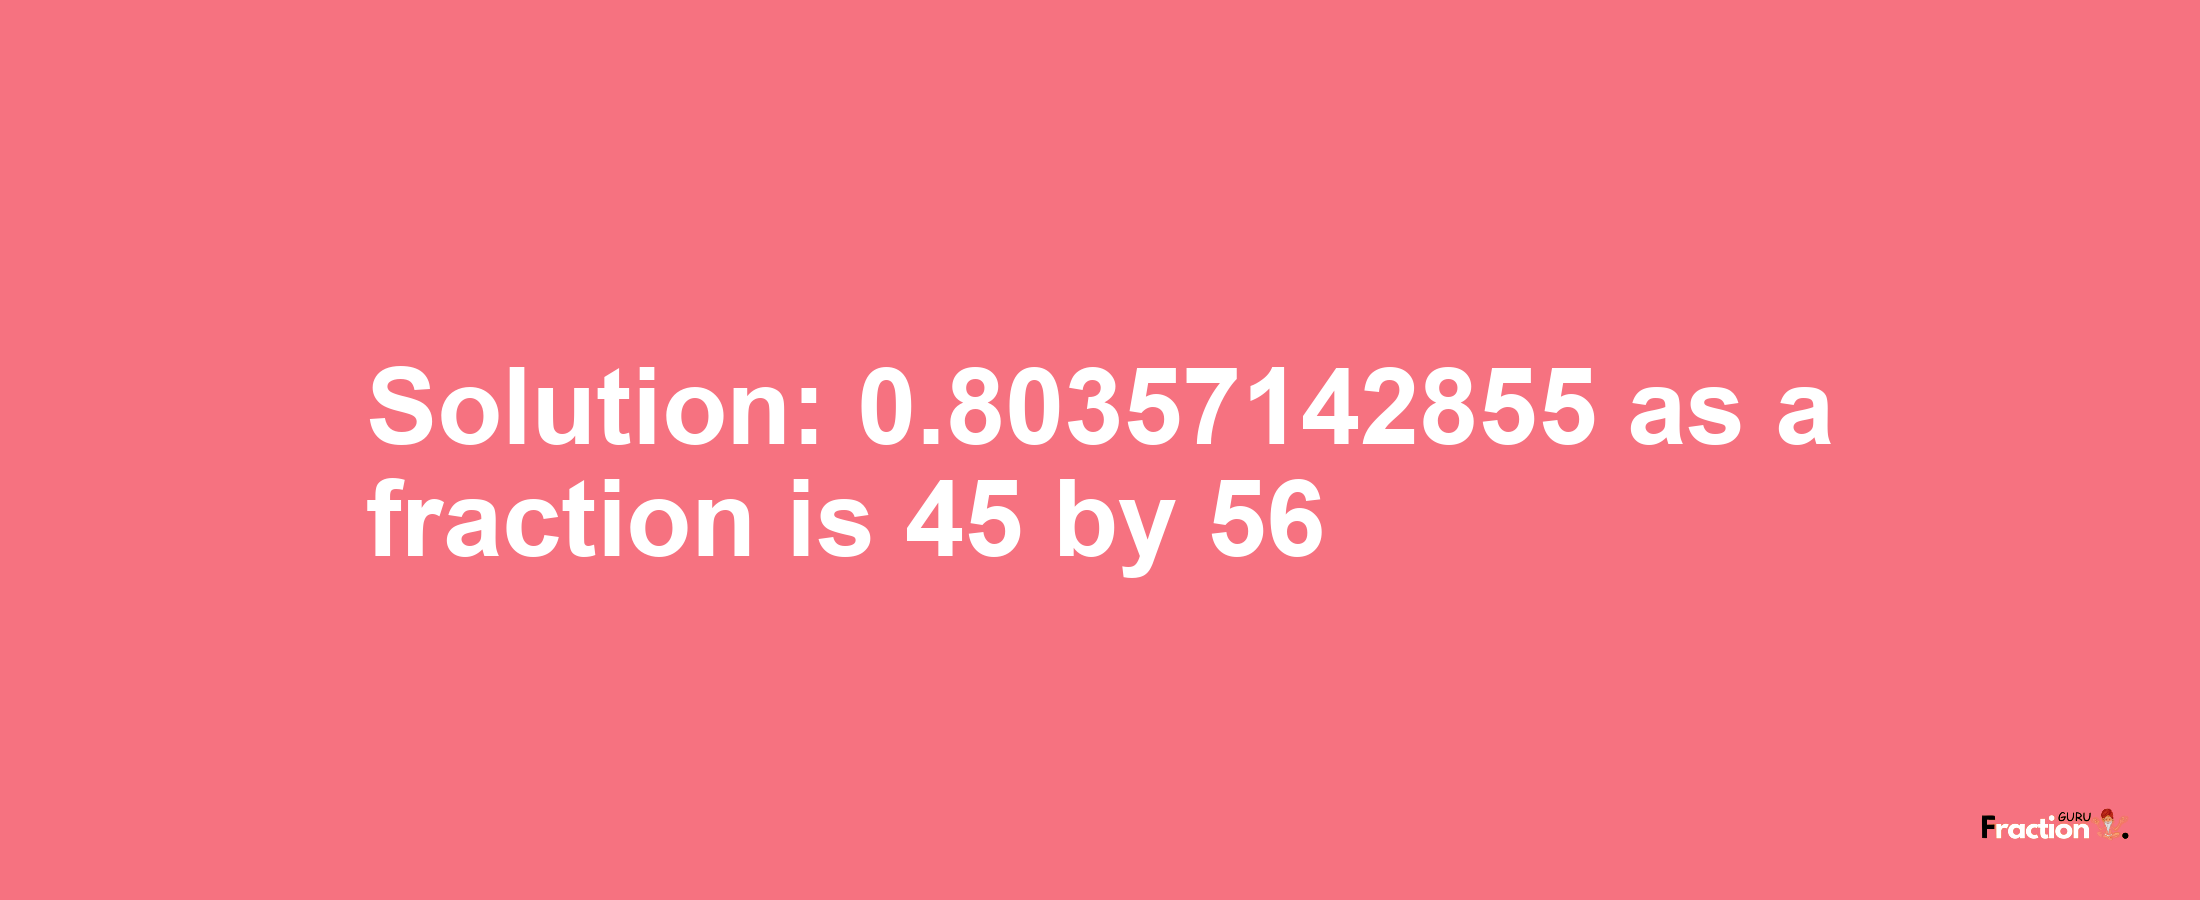 Solution:0.80357142855 as a fraction is 45/56